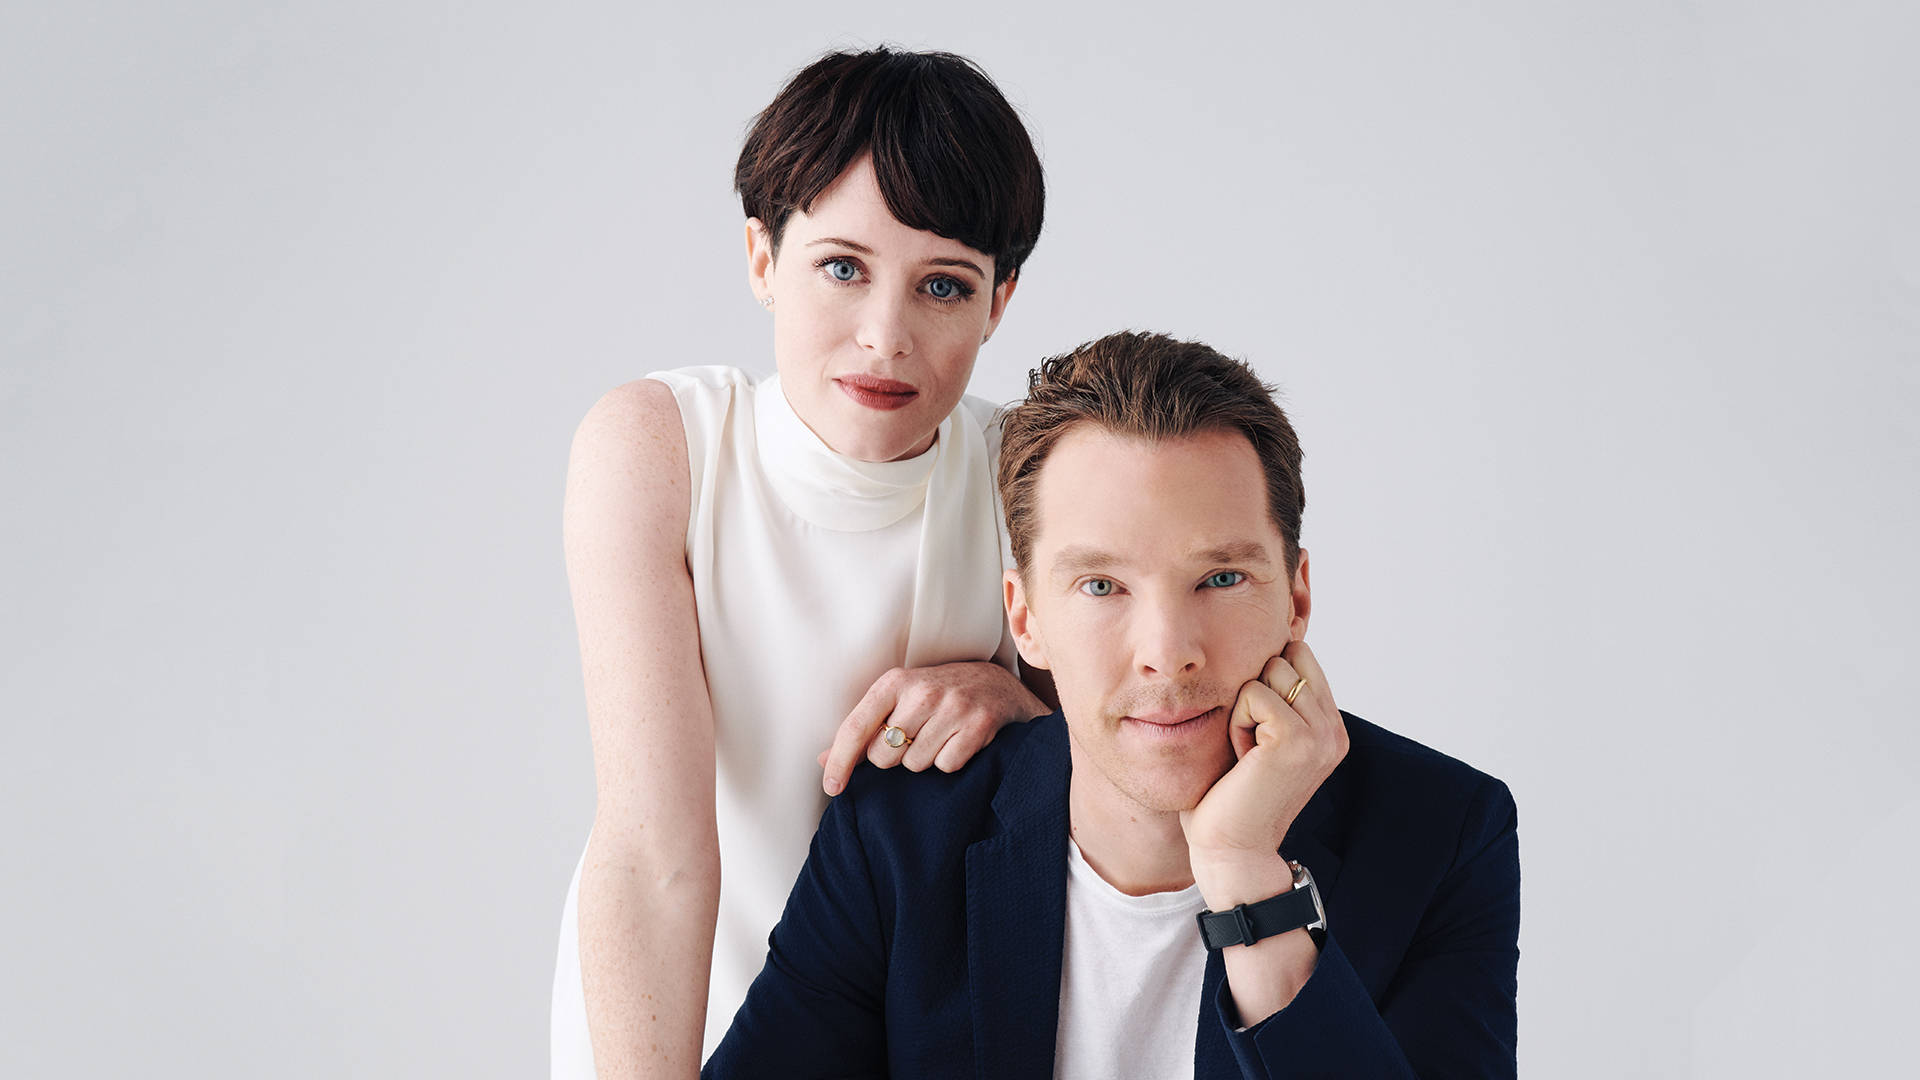 Benedict Cumberbatch With Claire Foy Background